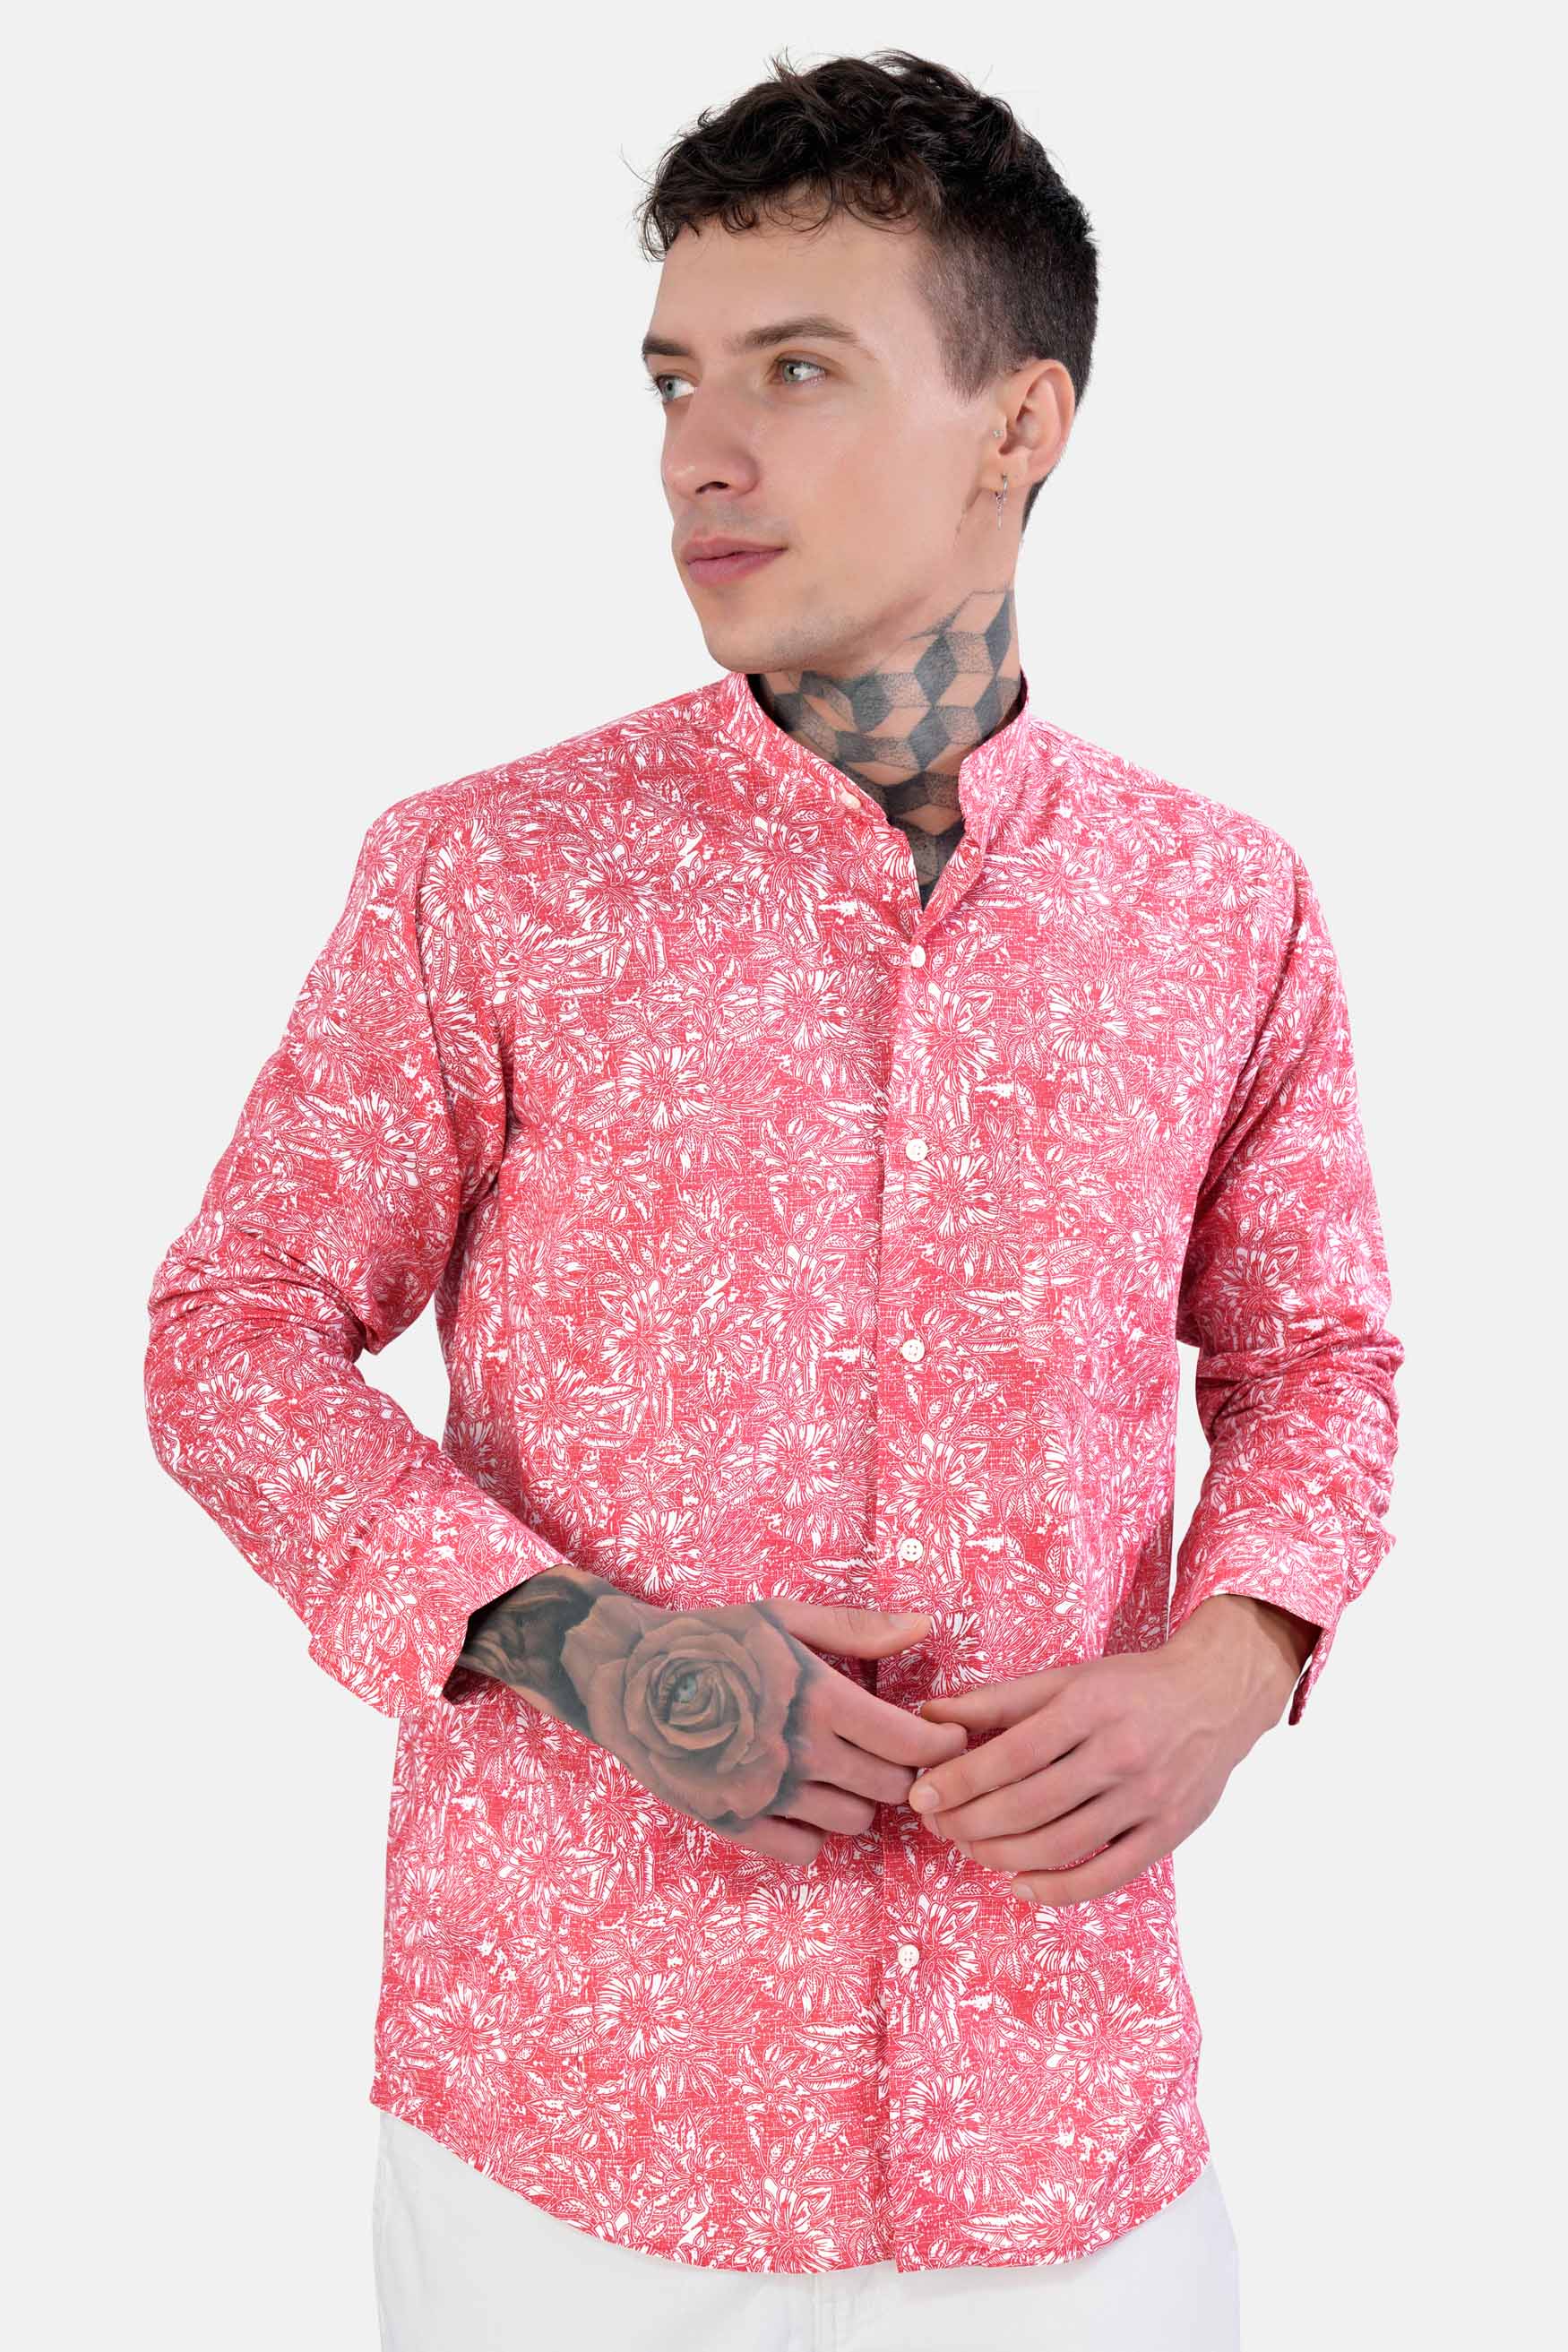 Brink Pink and White Floral Printed Luxurious Linen Shirt